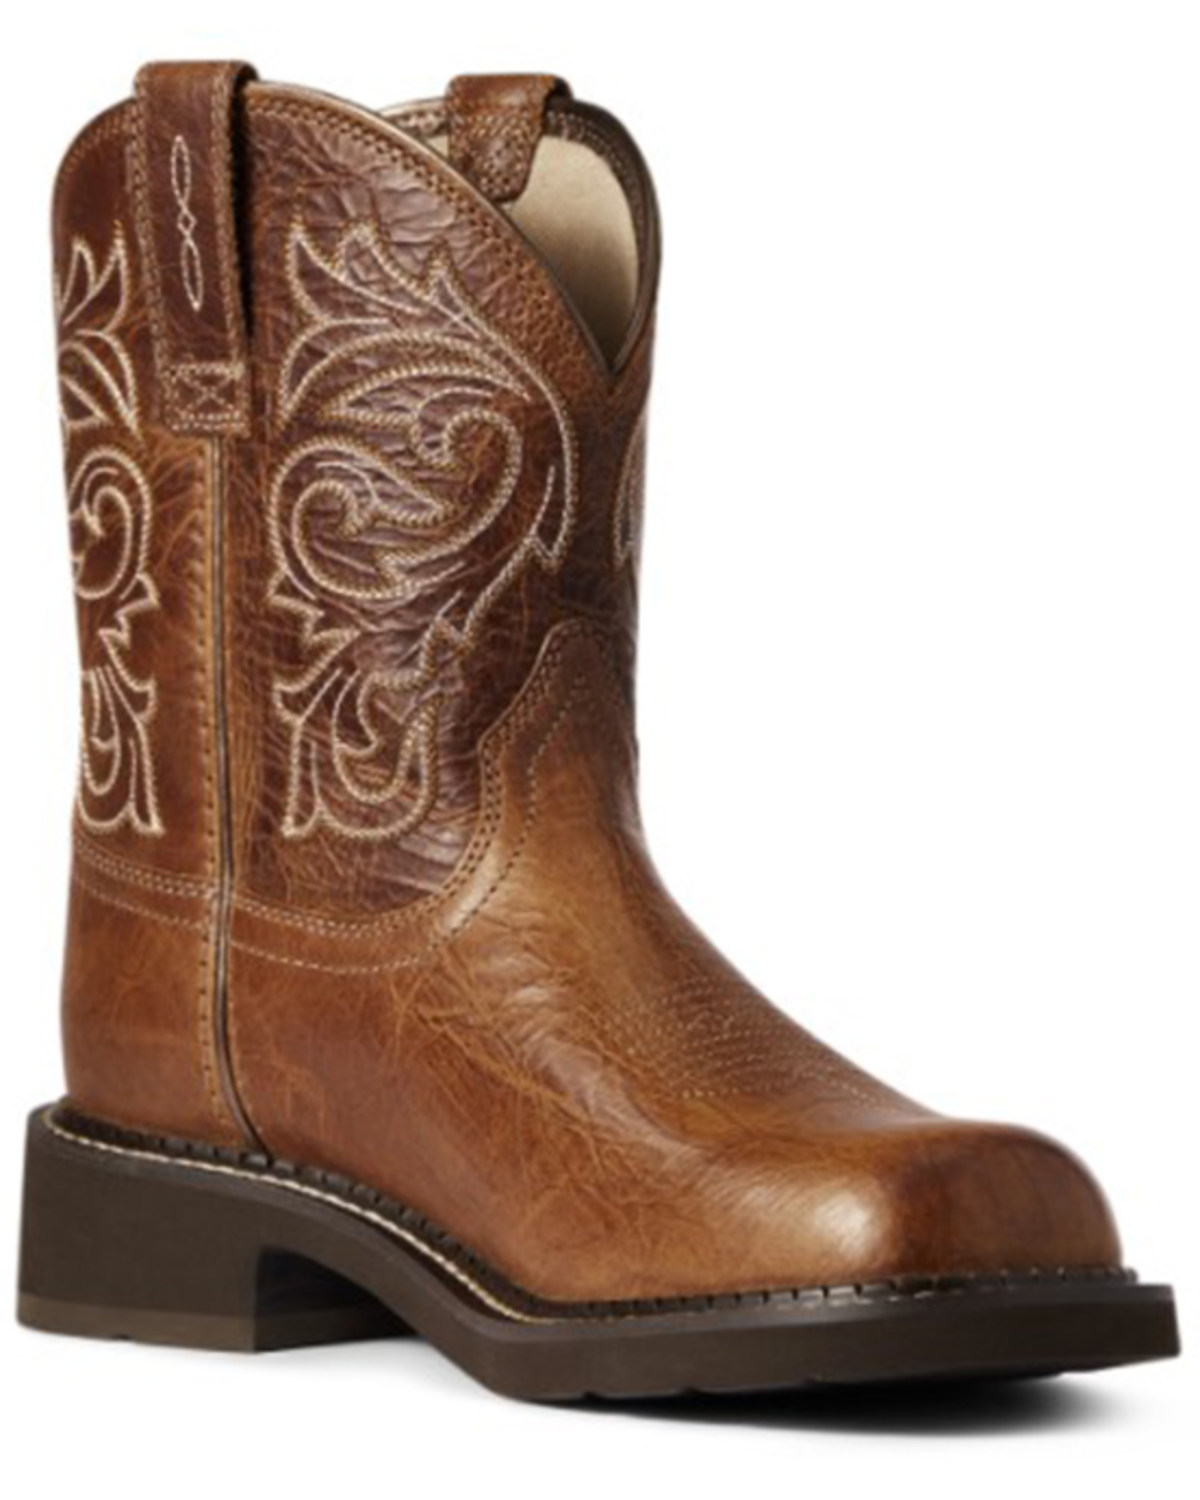 Ariat Women's Mazy Heritage Western Boots - Round Toe